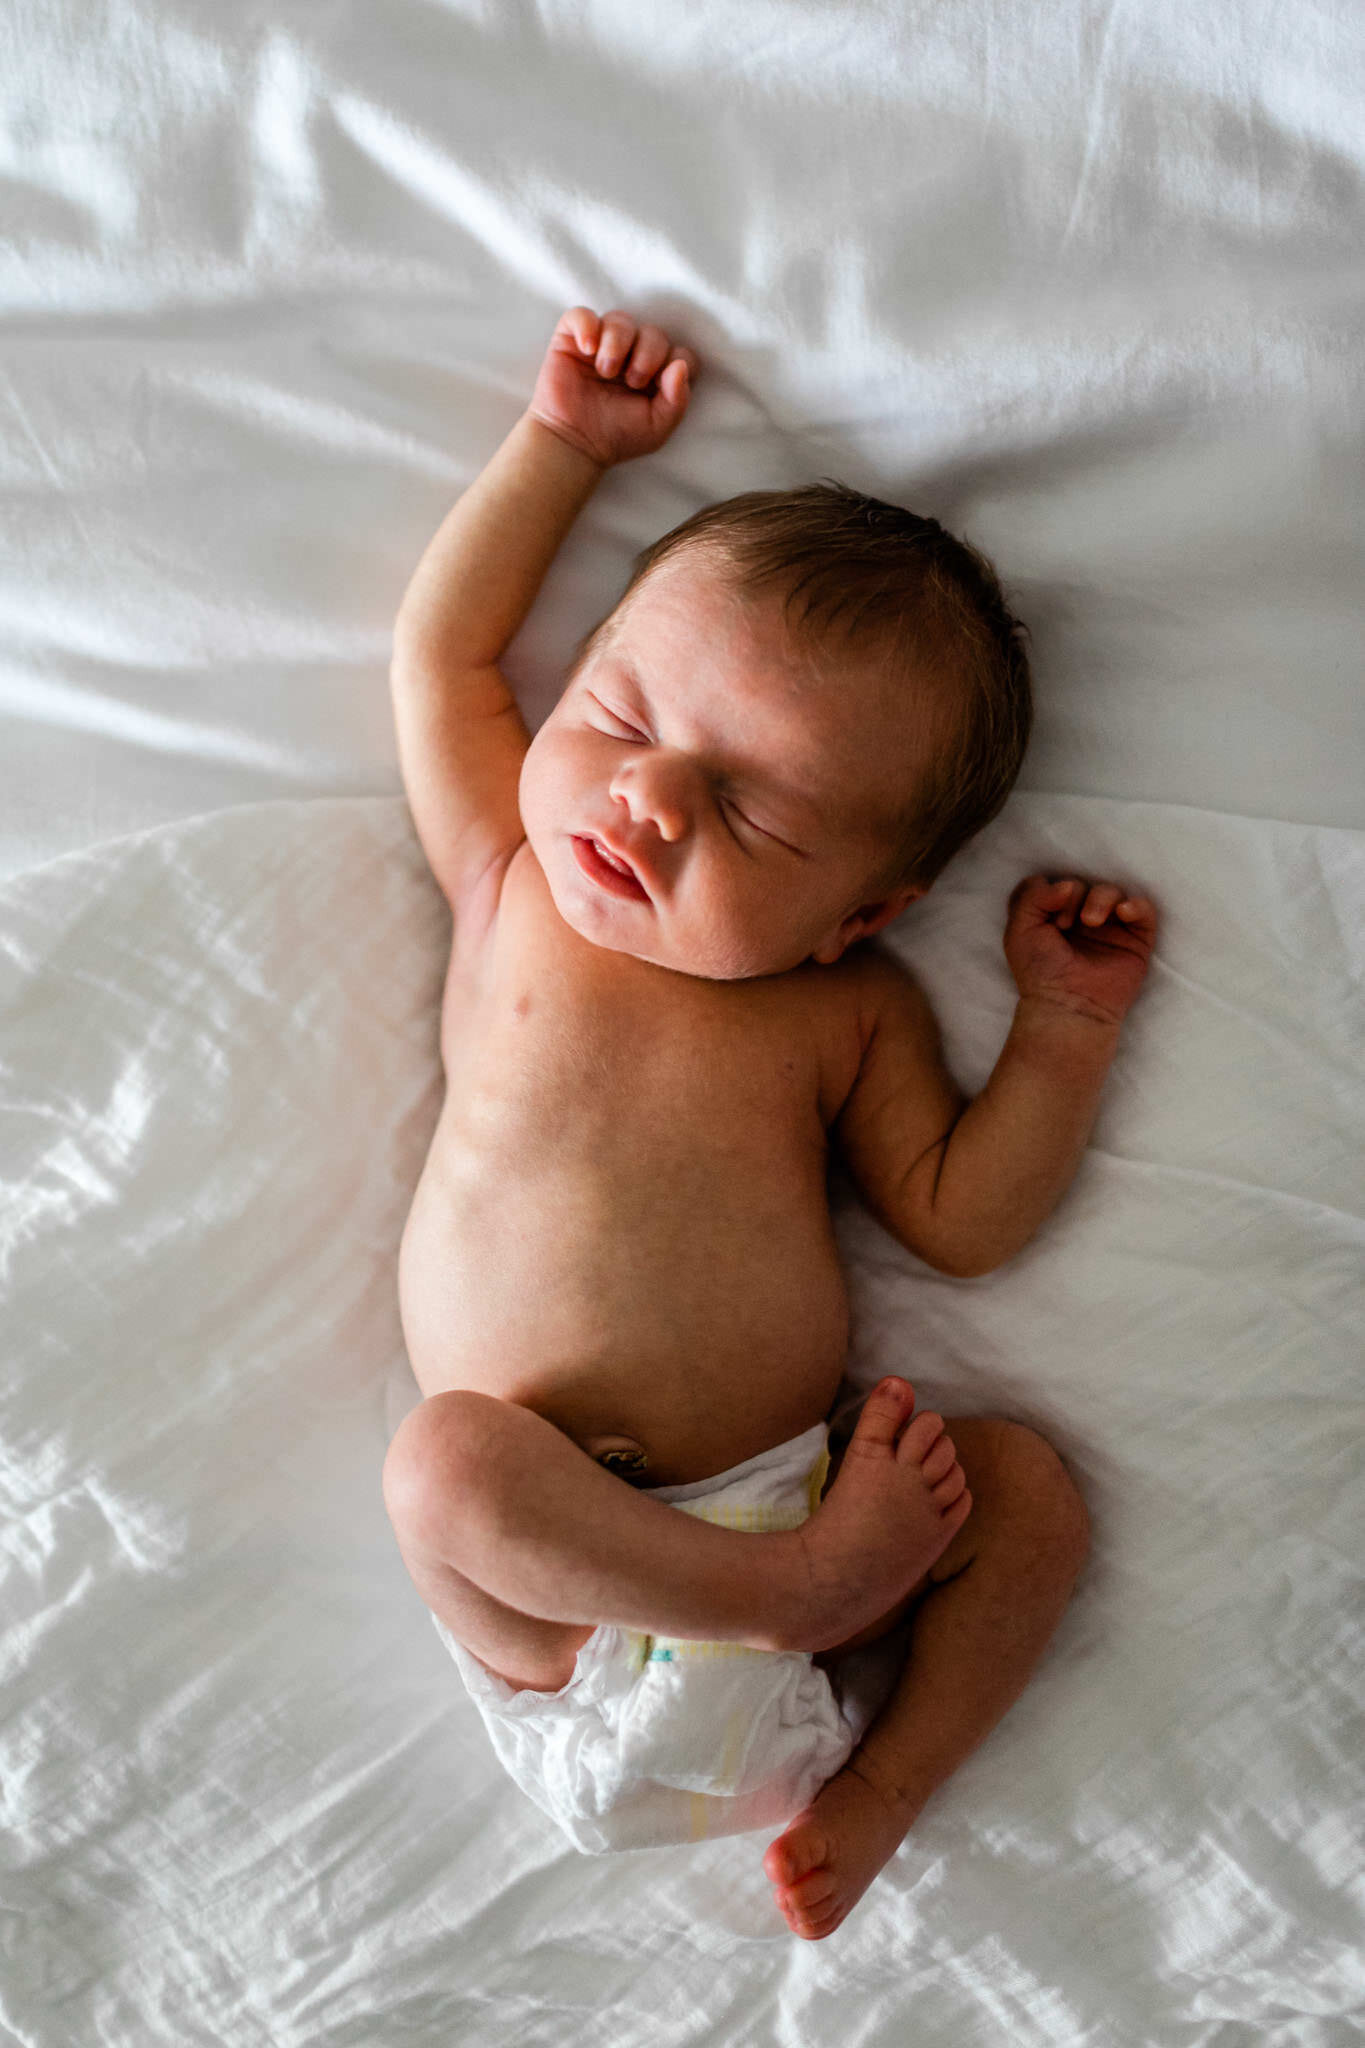 Durham Newborn Photographer | By G. Lin Photography | Baby sleeping on bed